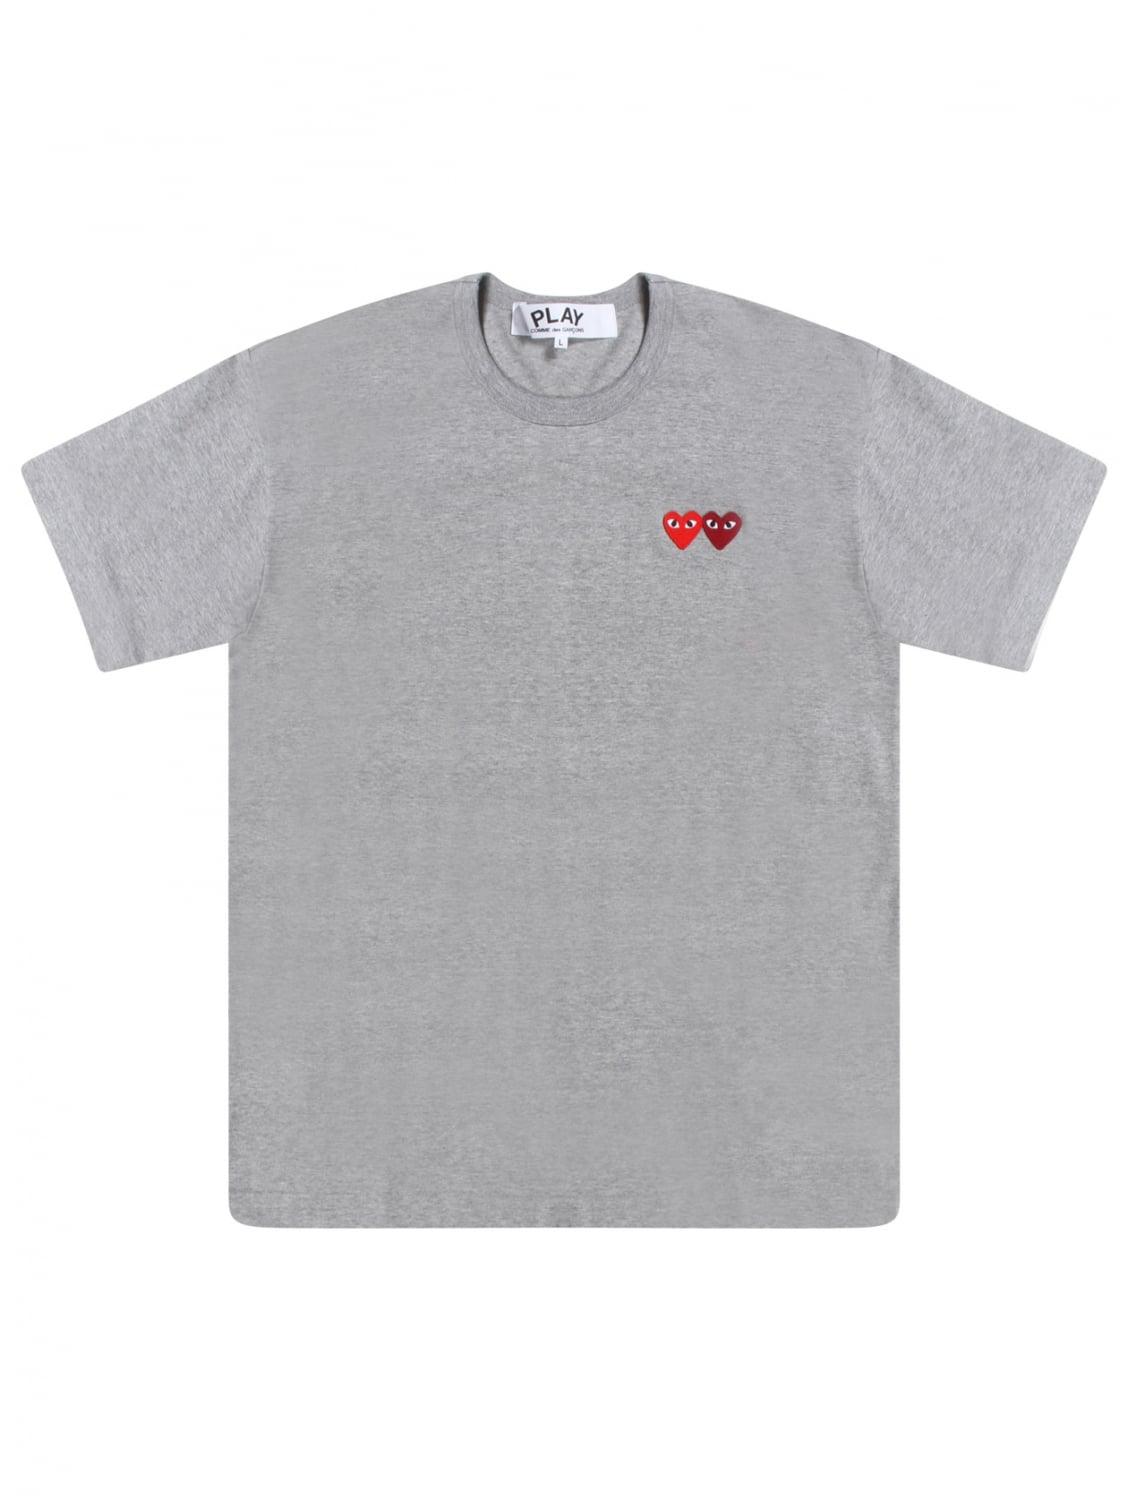 Comme des Garçons Cotton Play Men's Twin Heart T-shirt Grey in Gray for ...